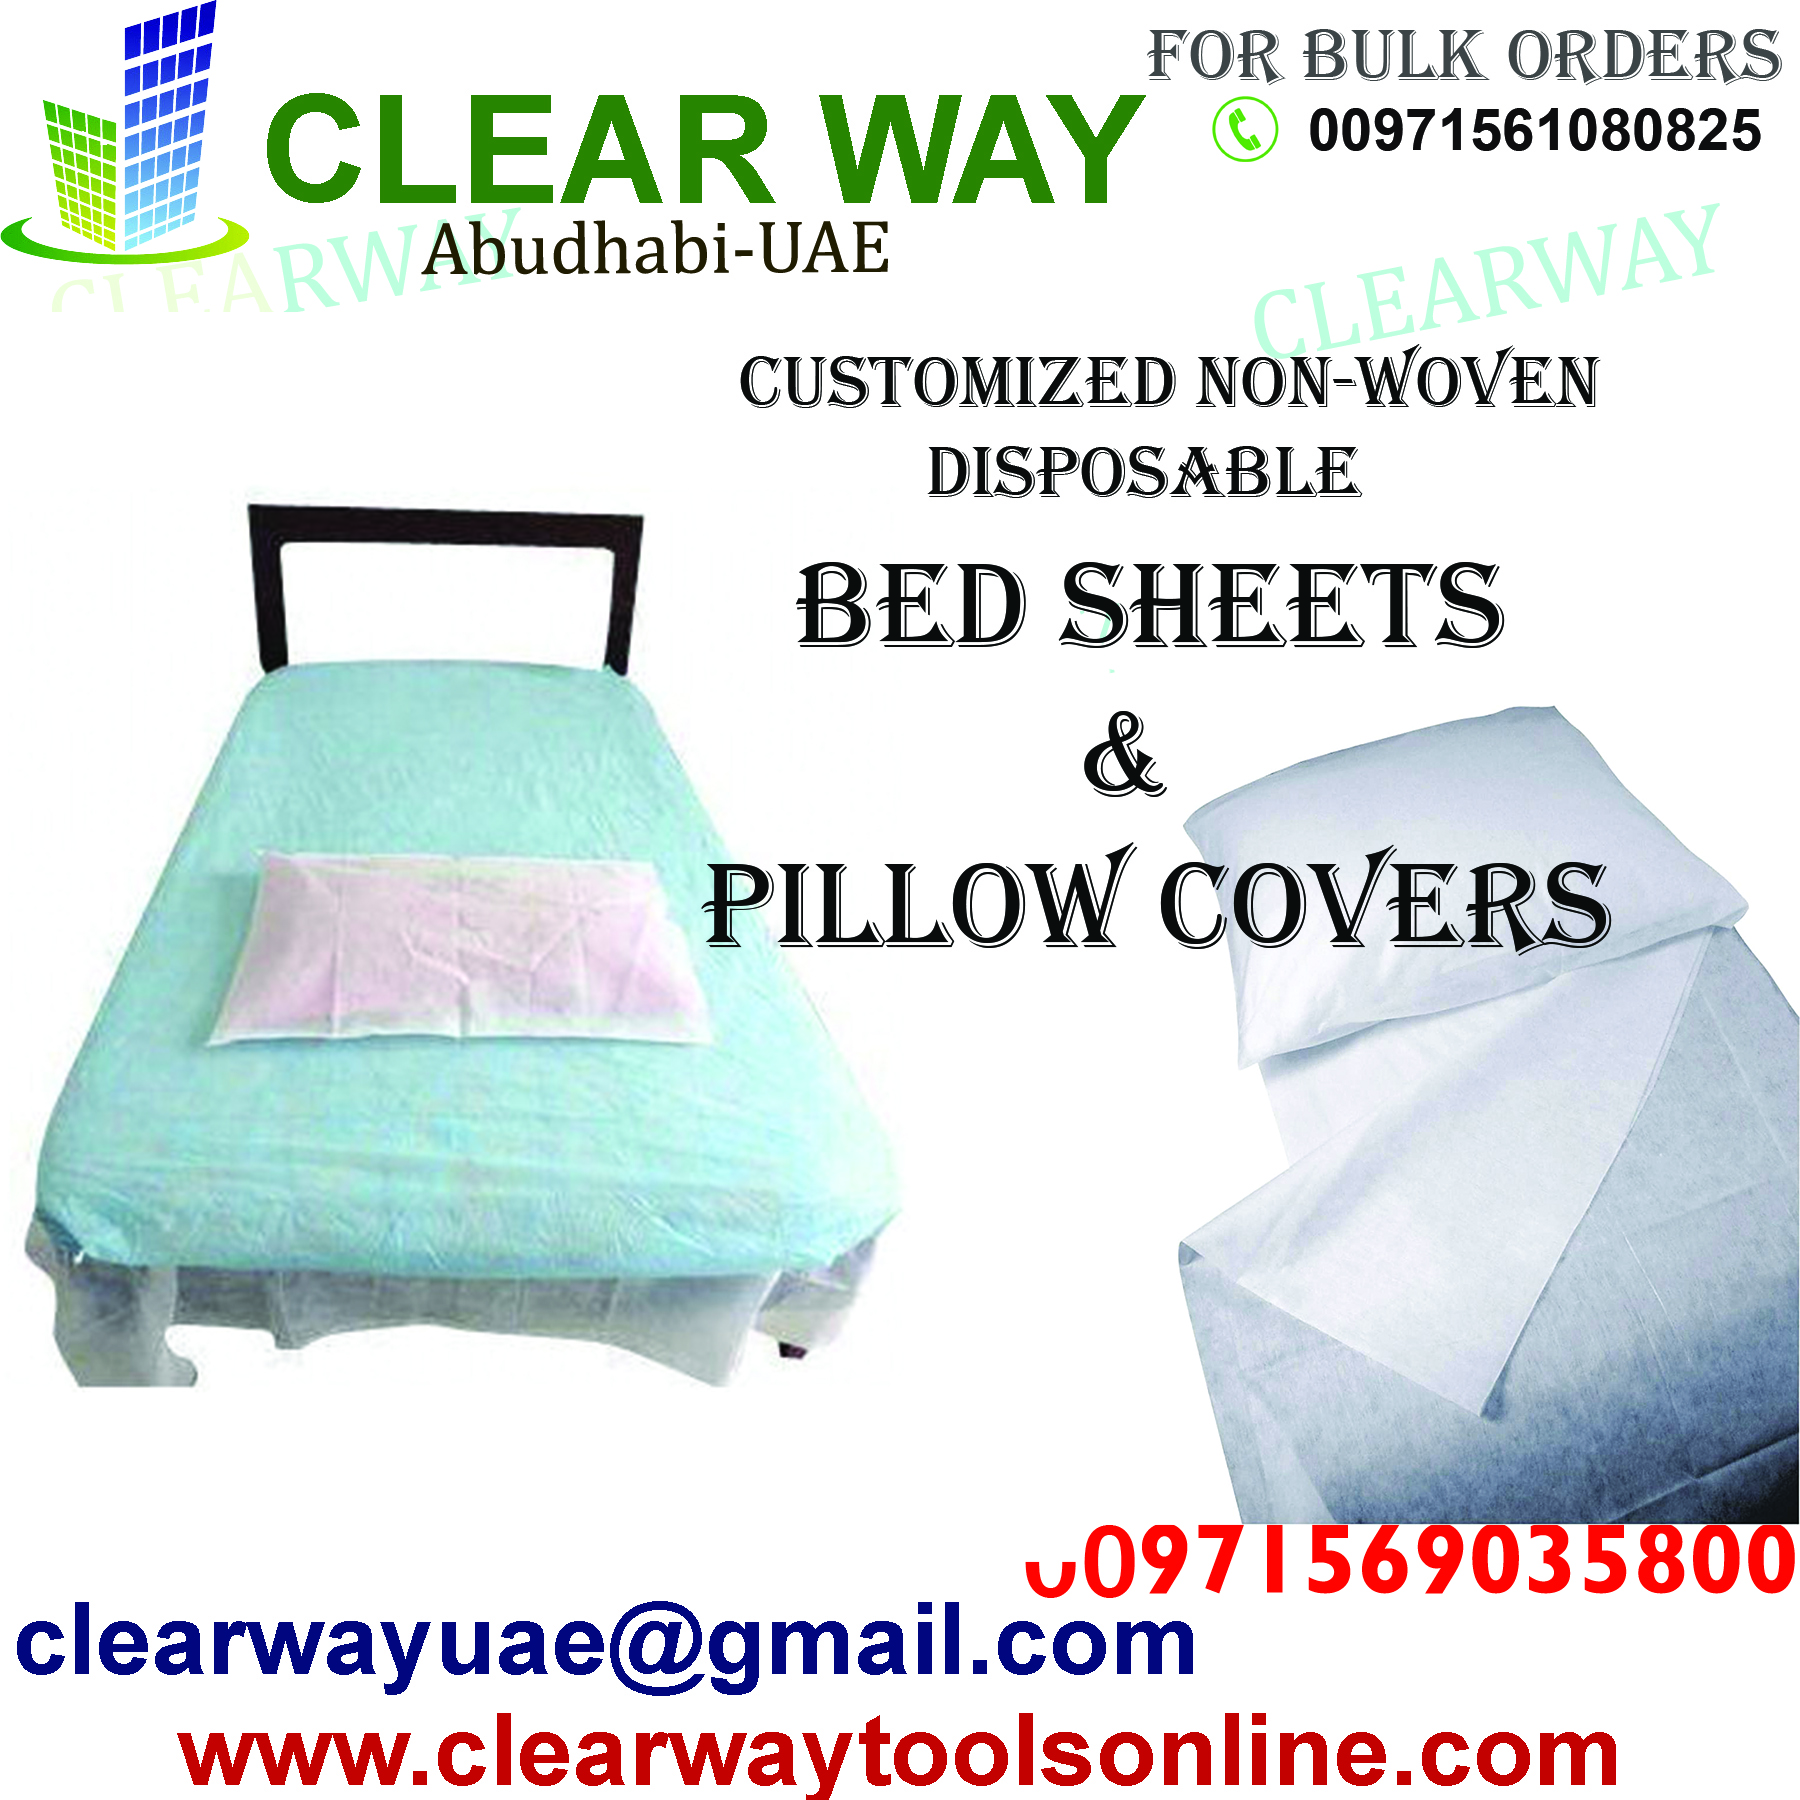 CUSTOMIZED NON WOVEN DISPOSABLE BEDSHEETS AND PILLOW COVERS DEALER N MUSSAFAH , ABUDHABI , UAE BY CLEARWAY